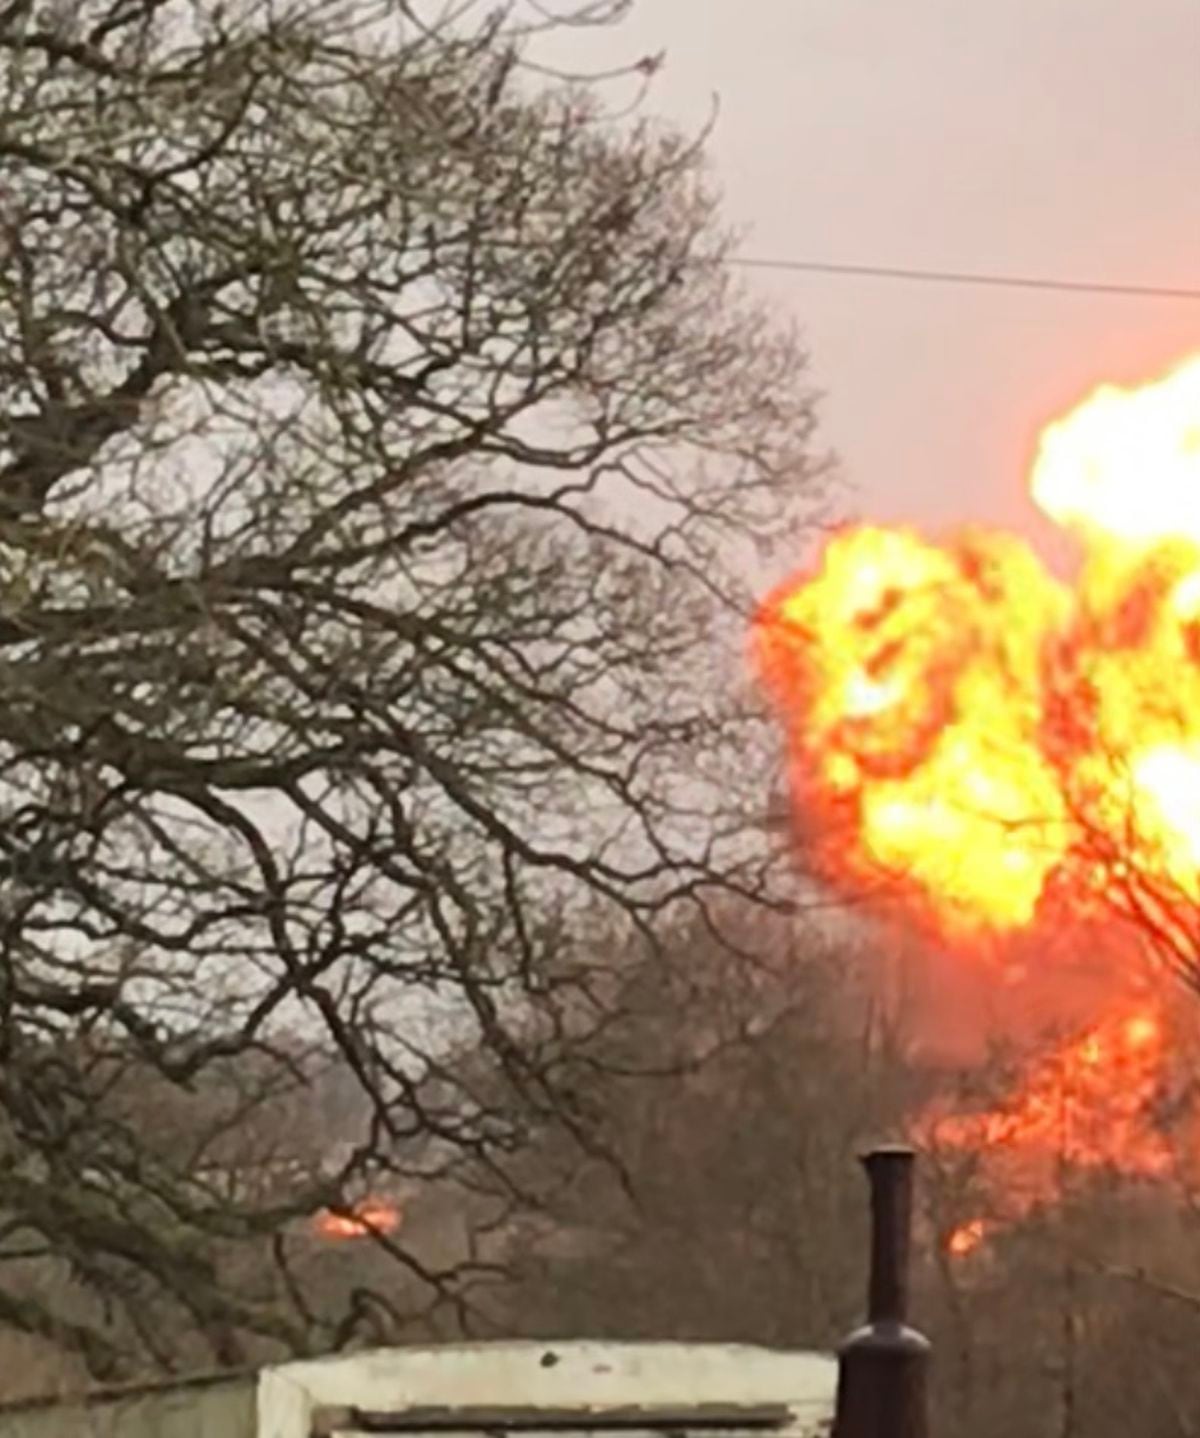 Fireball erupts into the sky after the explosion at the barn near Kingsnordley. Photo: Claire Ashmore